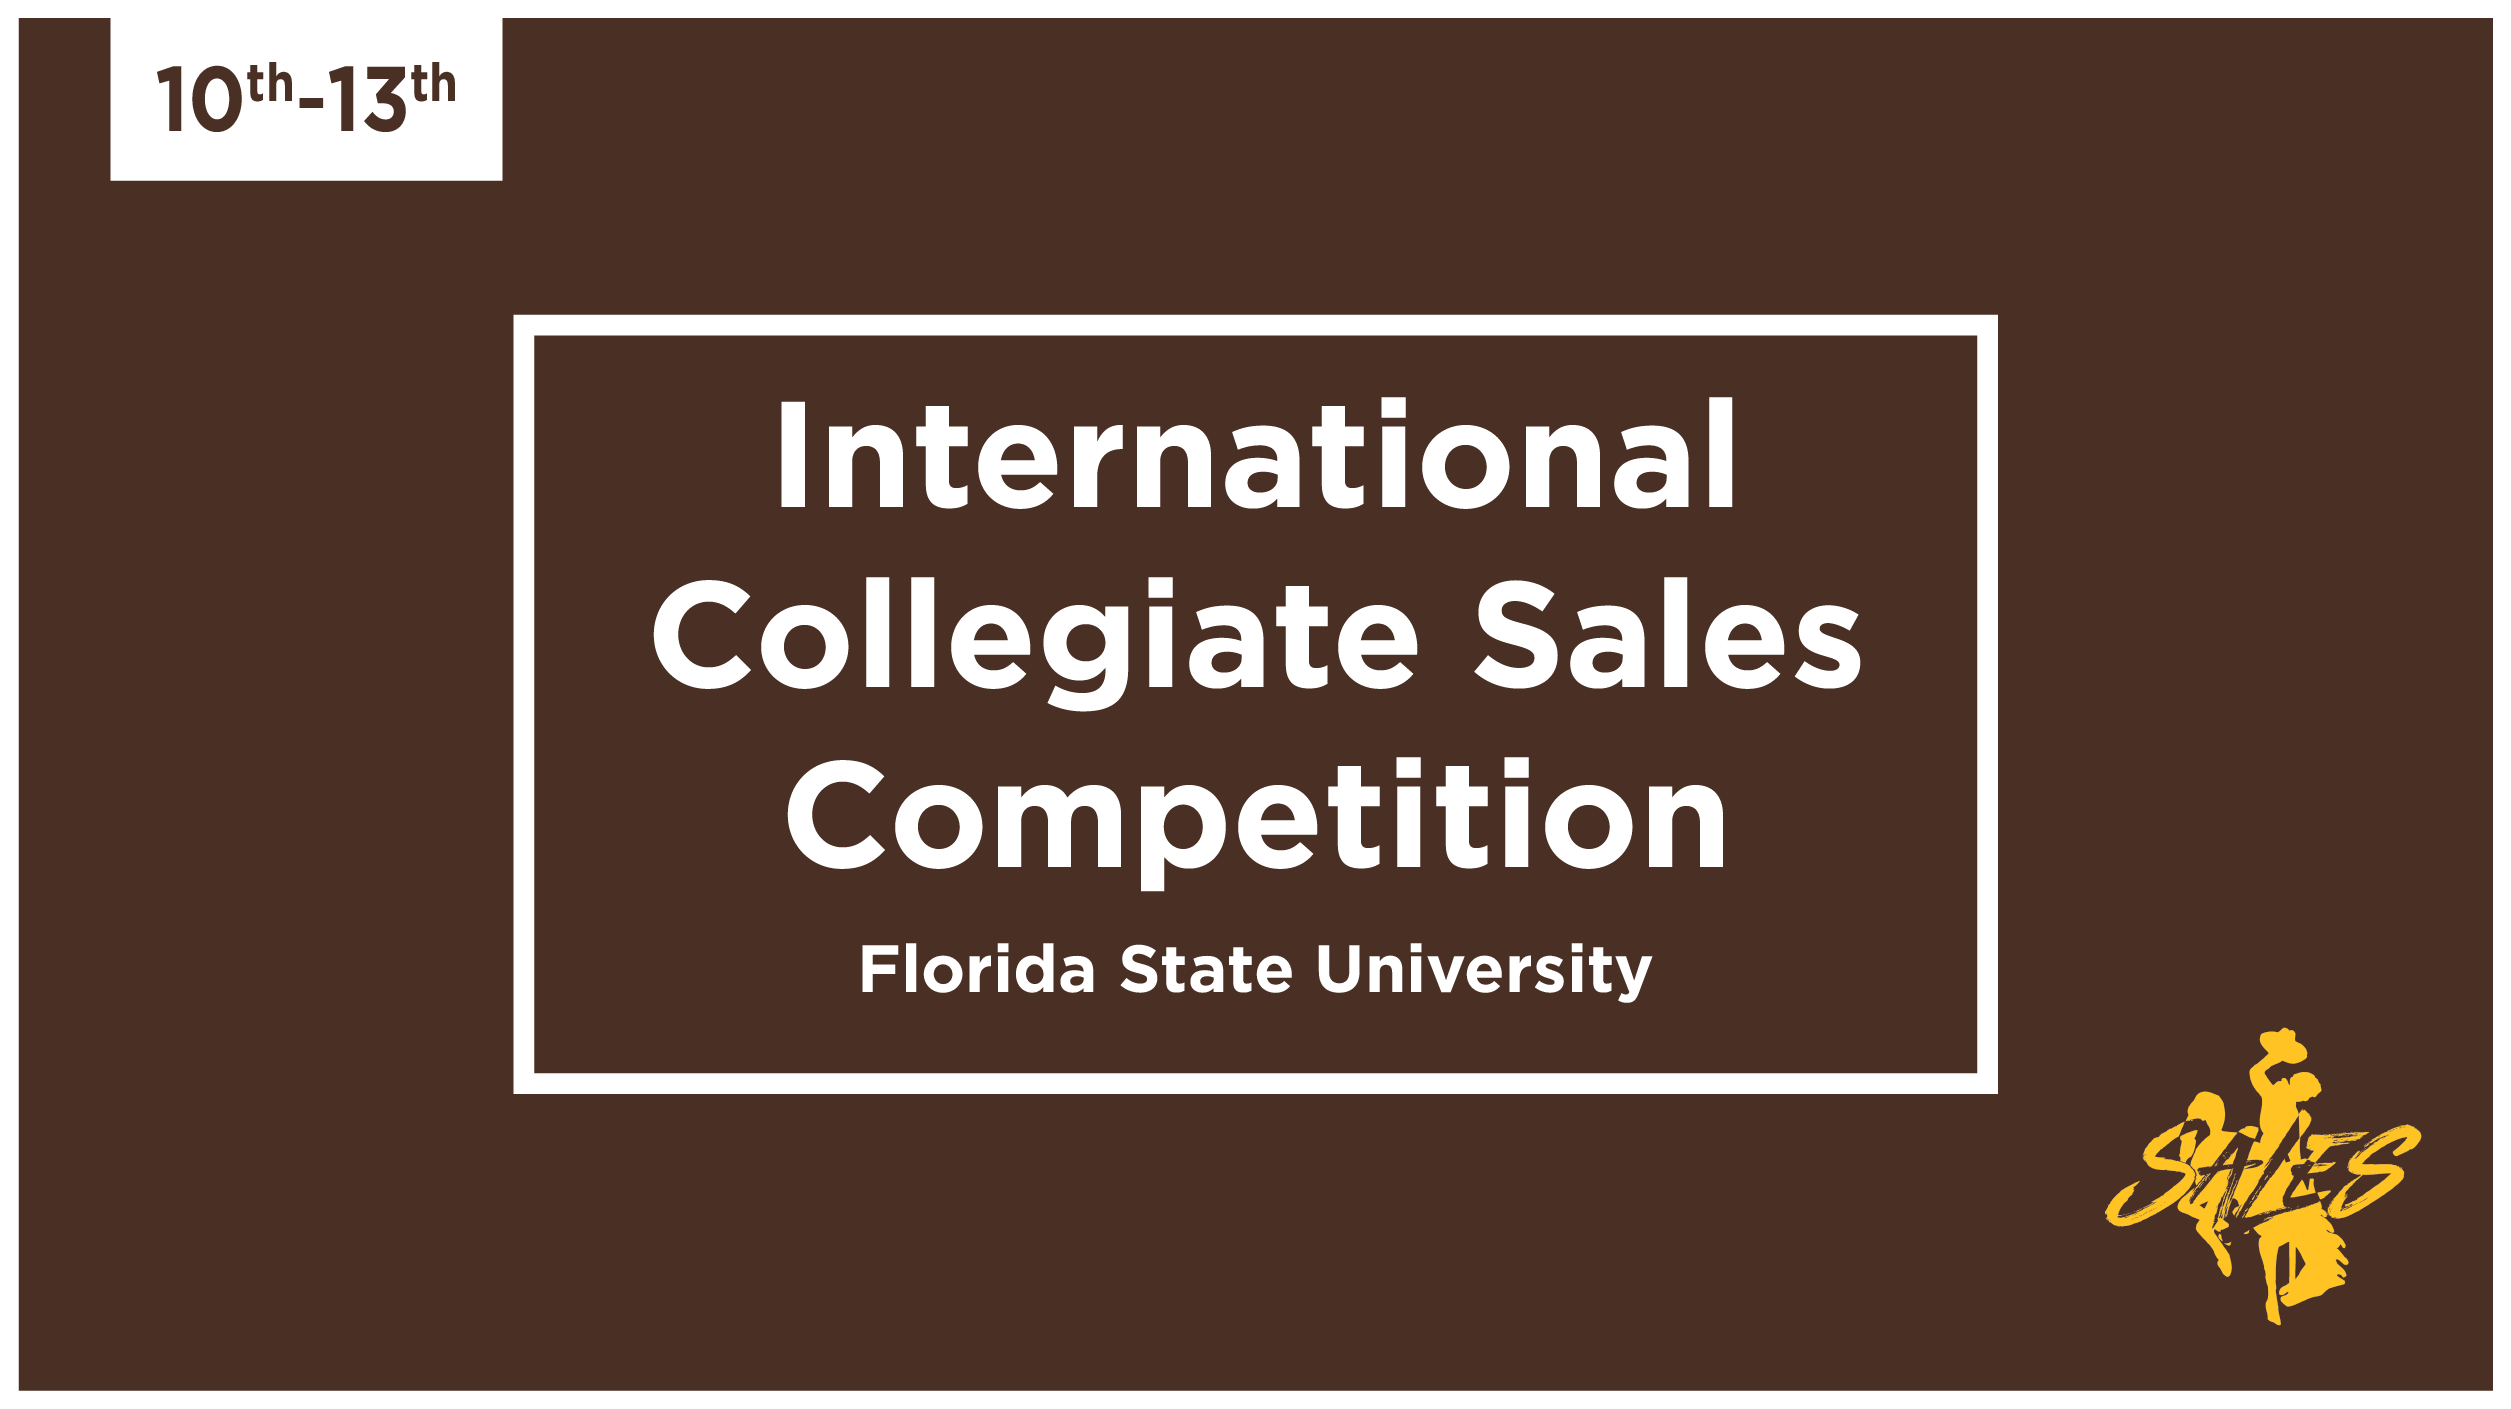 International Collegiate Sales Competition November 10th - 13th